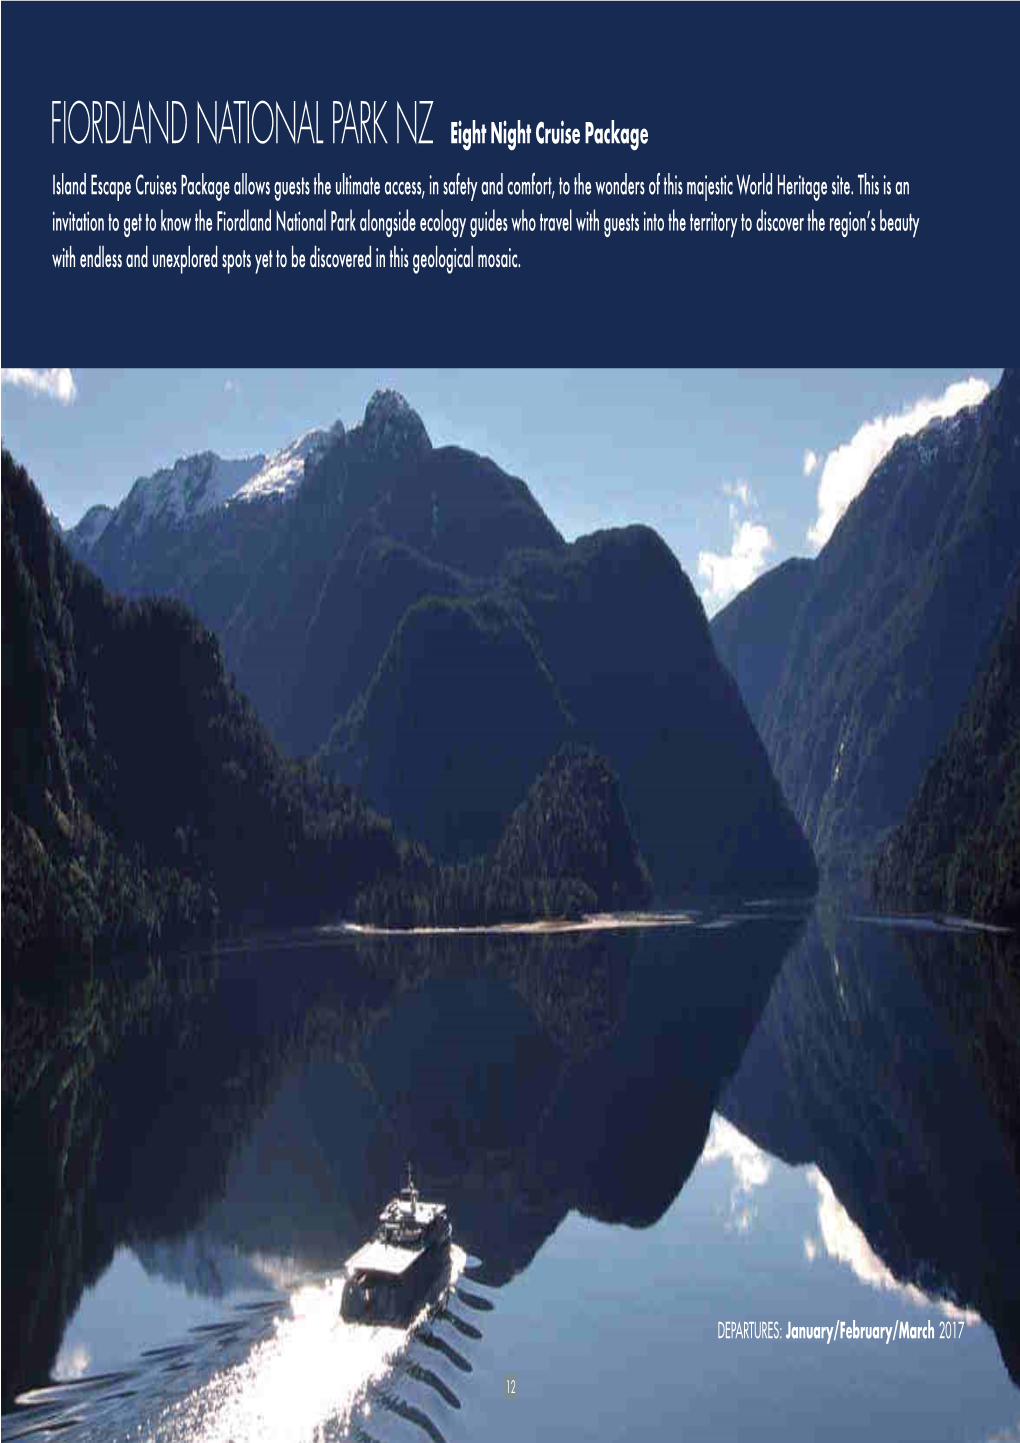 FIORDLAND NATIONAL PARK NZ Eight Night Cruise Package